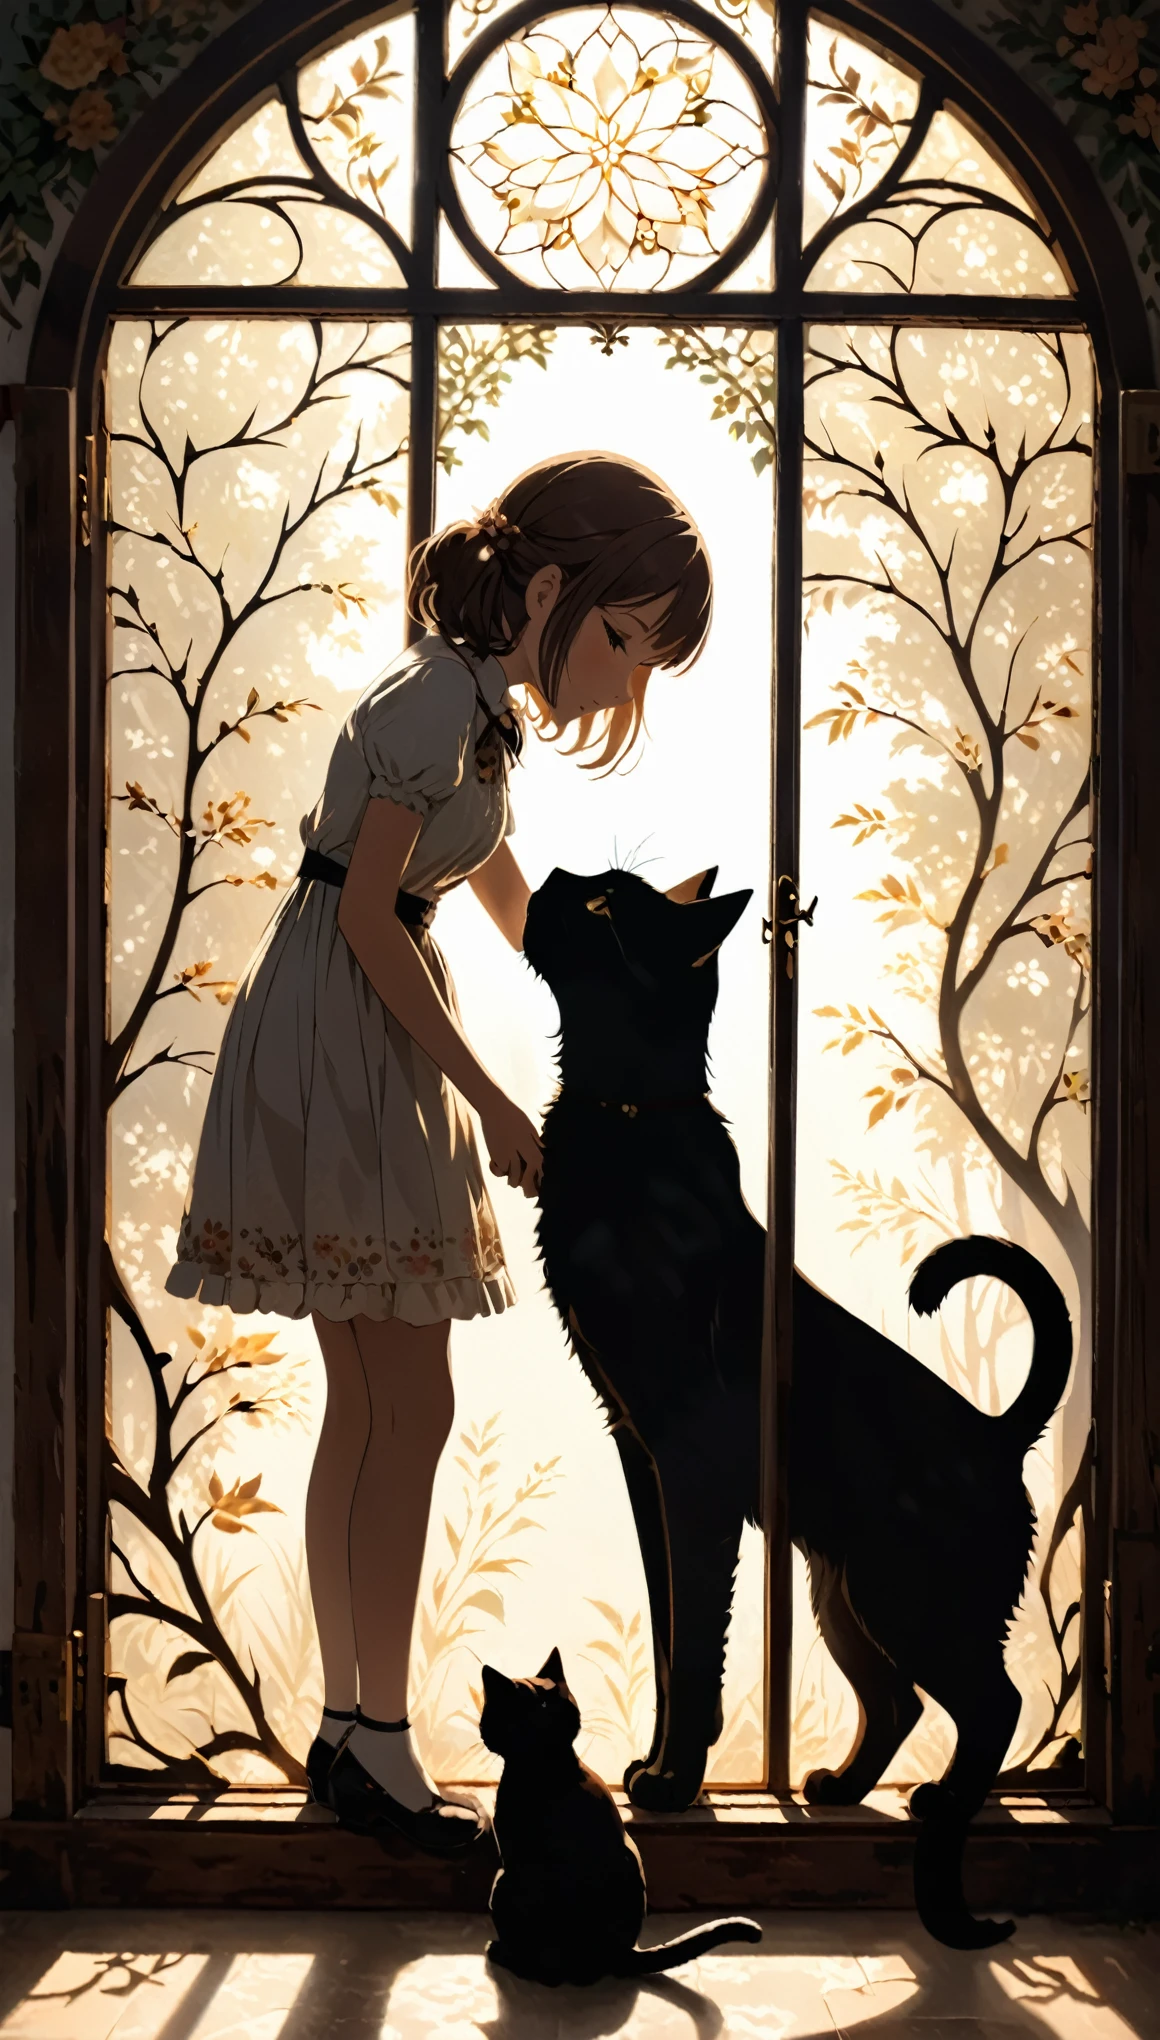 silhouettes of a cat and a girl framed within a massive vintage window frame. The silhouette captures the girl as she bends down to gently grasp the cat's paw, forming a tender and heartwarming moment frozen in time. The interplay of light and shadow against the intricate details of the window frame adds depth and texture to the composition, creating a visually striking image that conveys a sense of connection and companionship between the girl and her feline friend